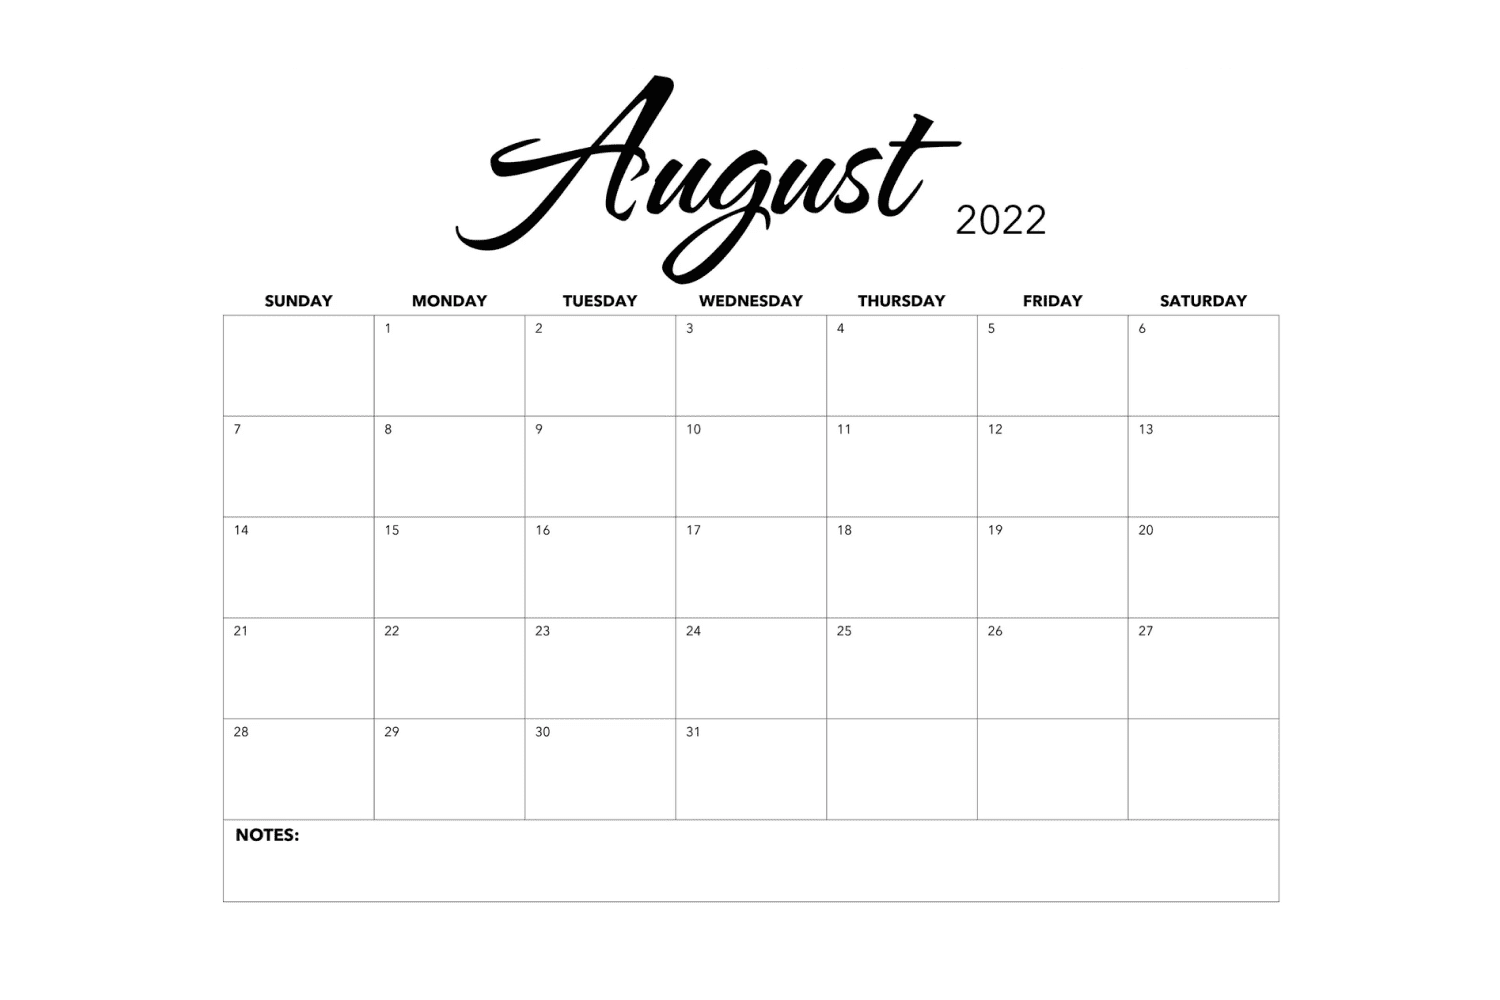 A very simple calendar in the form of a table in monochrome colors.